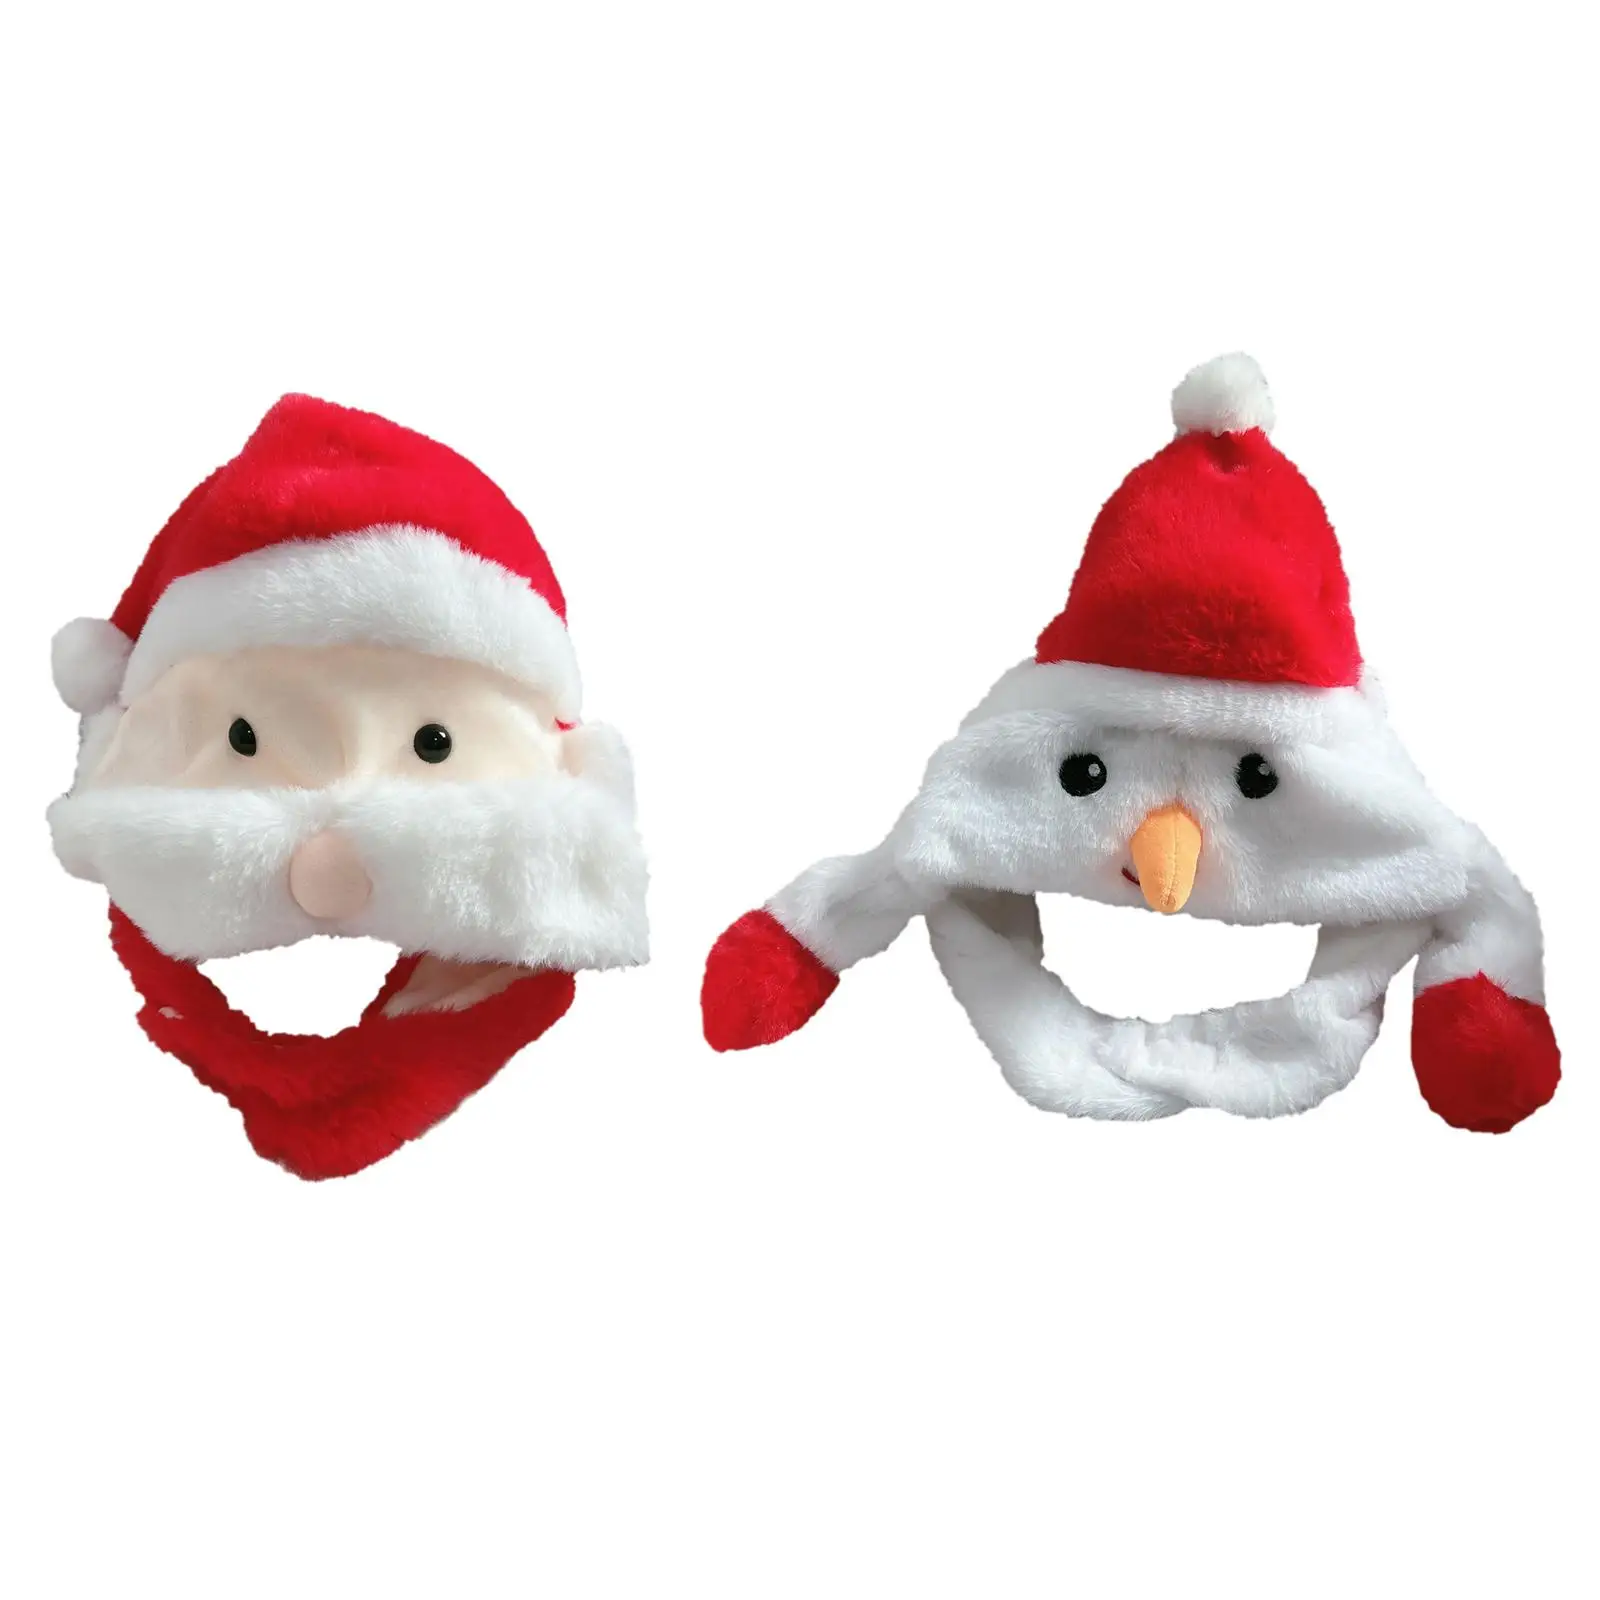 Soft Christmas Plush Hat Adult Kids Holiday Decorations Winter Novelty Headgear Warm Xmas Hat Funny for Dress Festival Party